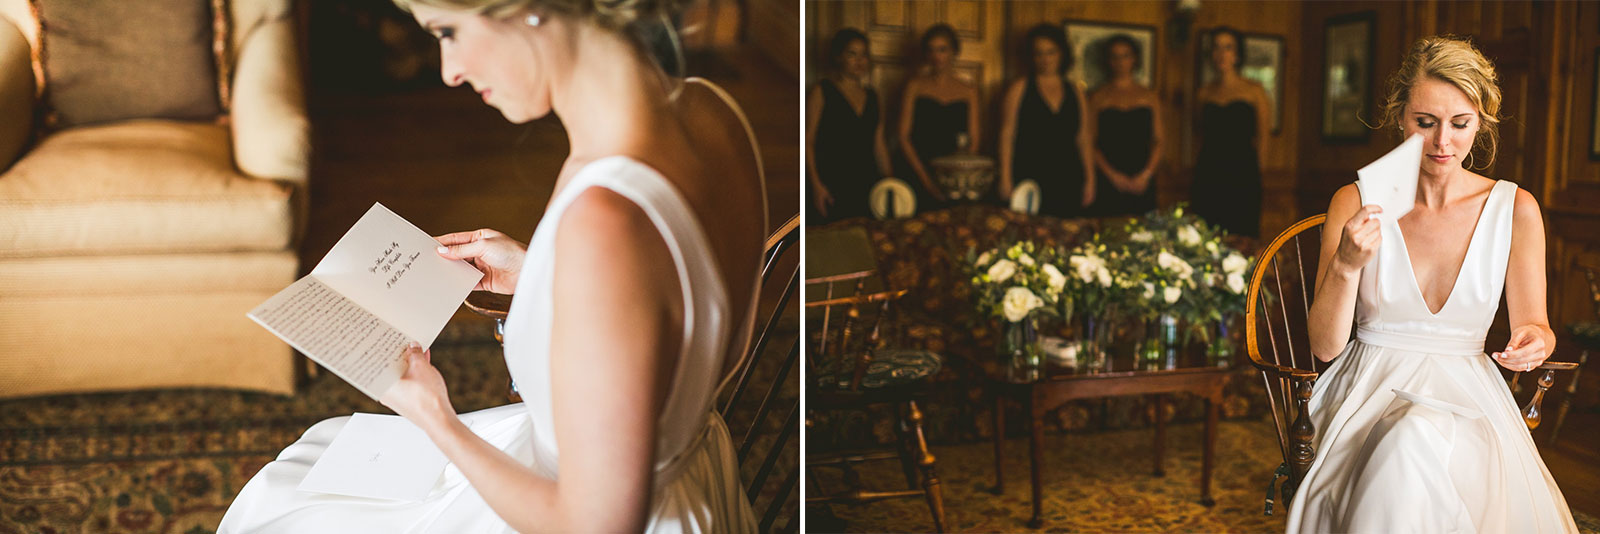 22 bride reading note - Stephanie + Zack // Conway Farms Chicago Wedding Photographers